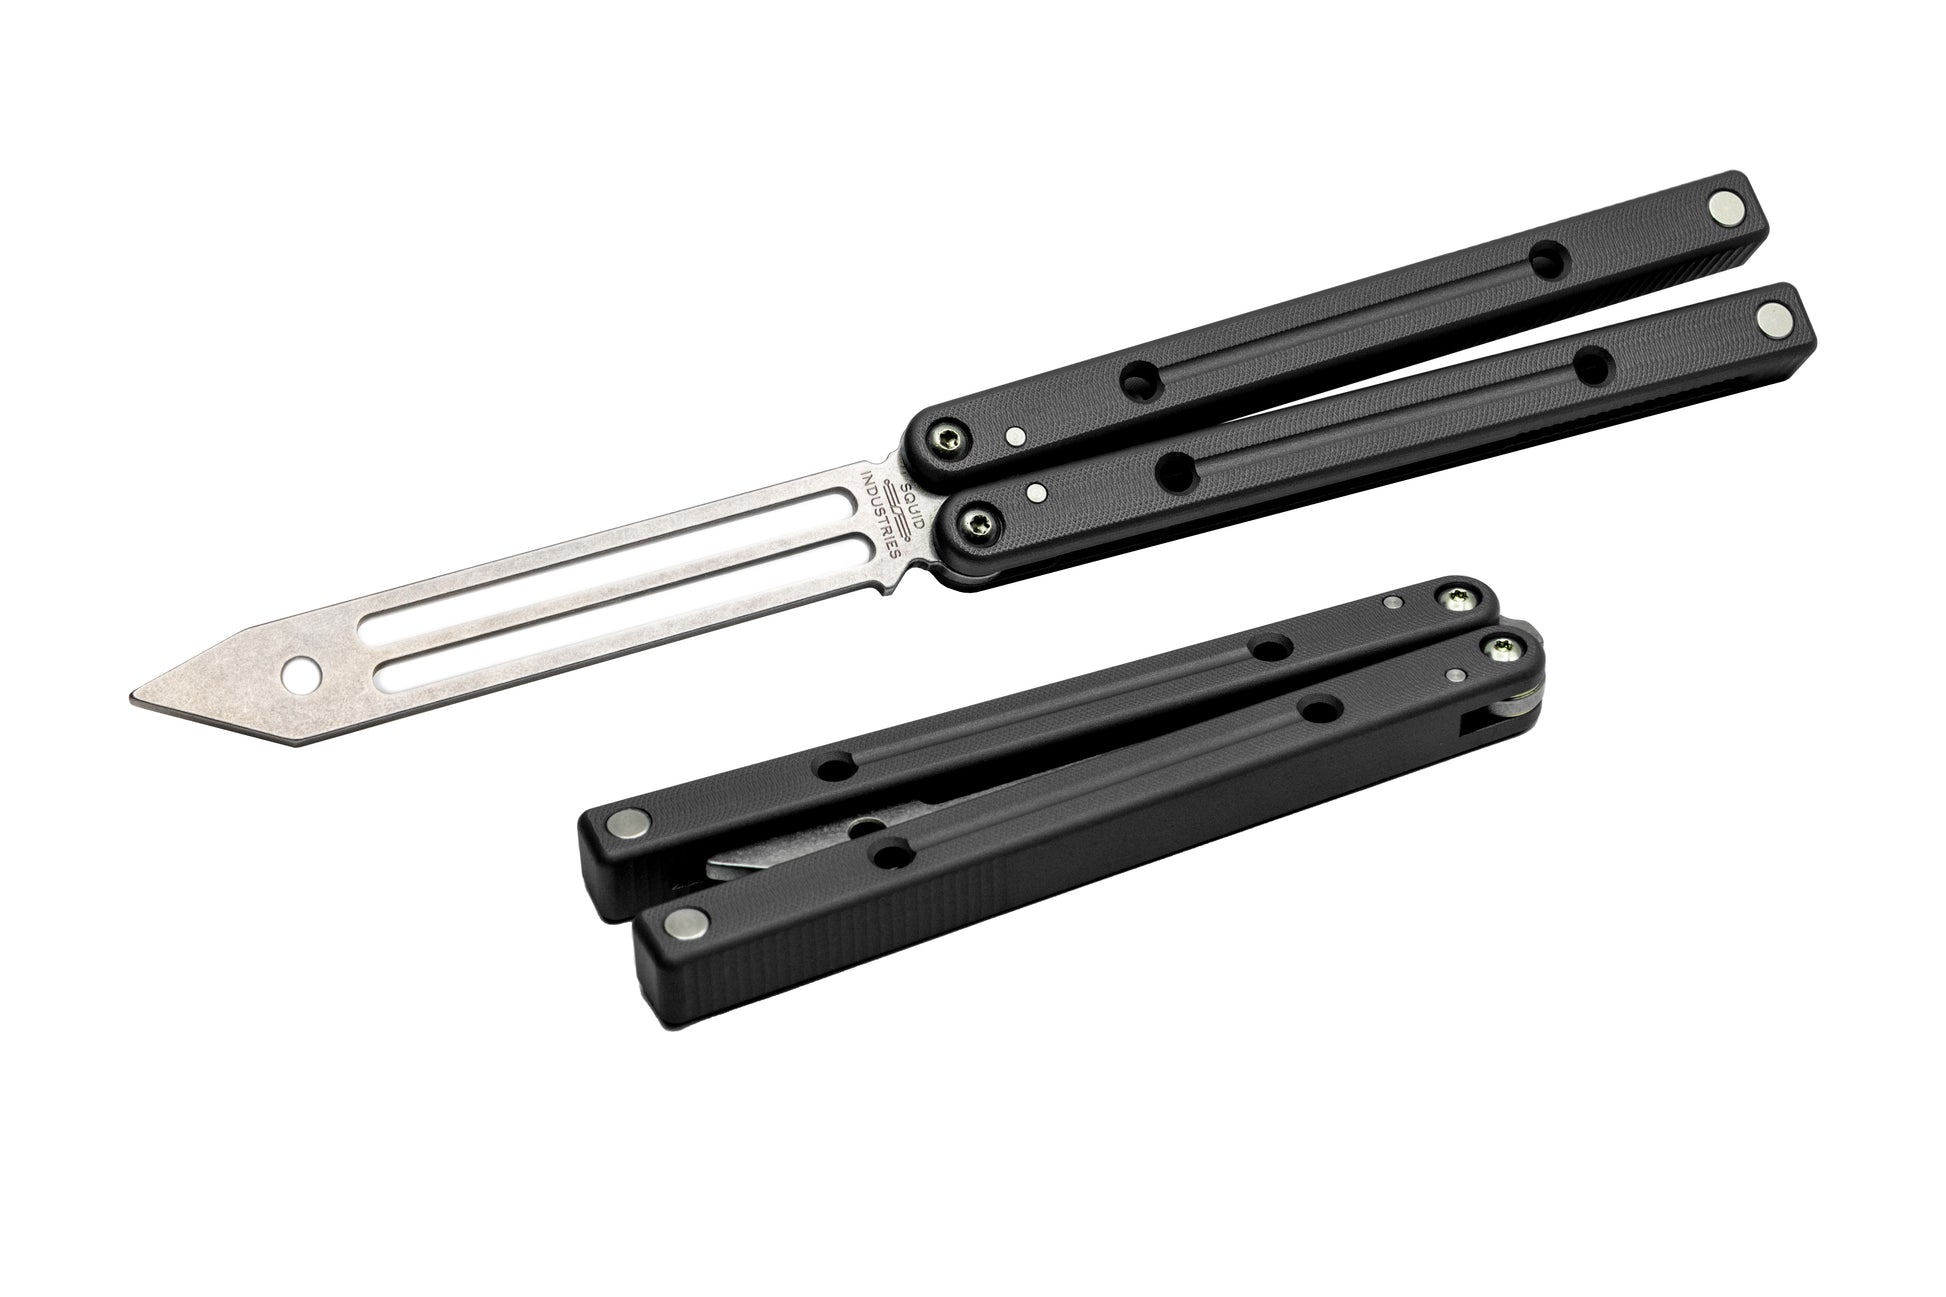 black squidtrainer butterfly knife trainer balisong 